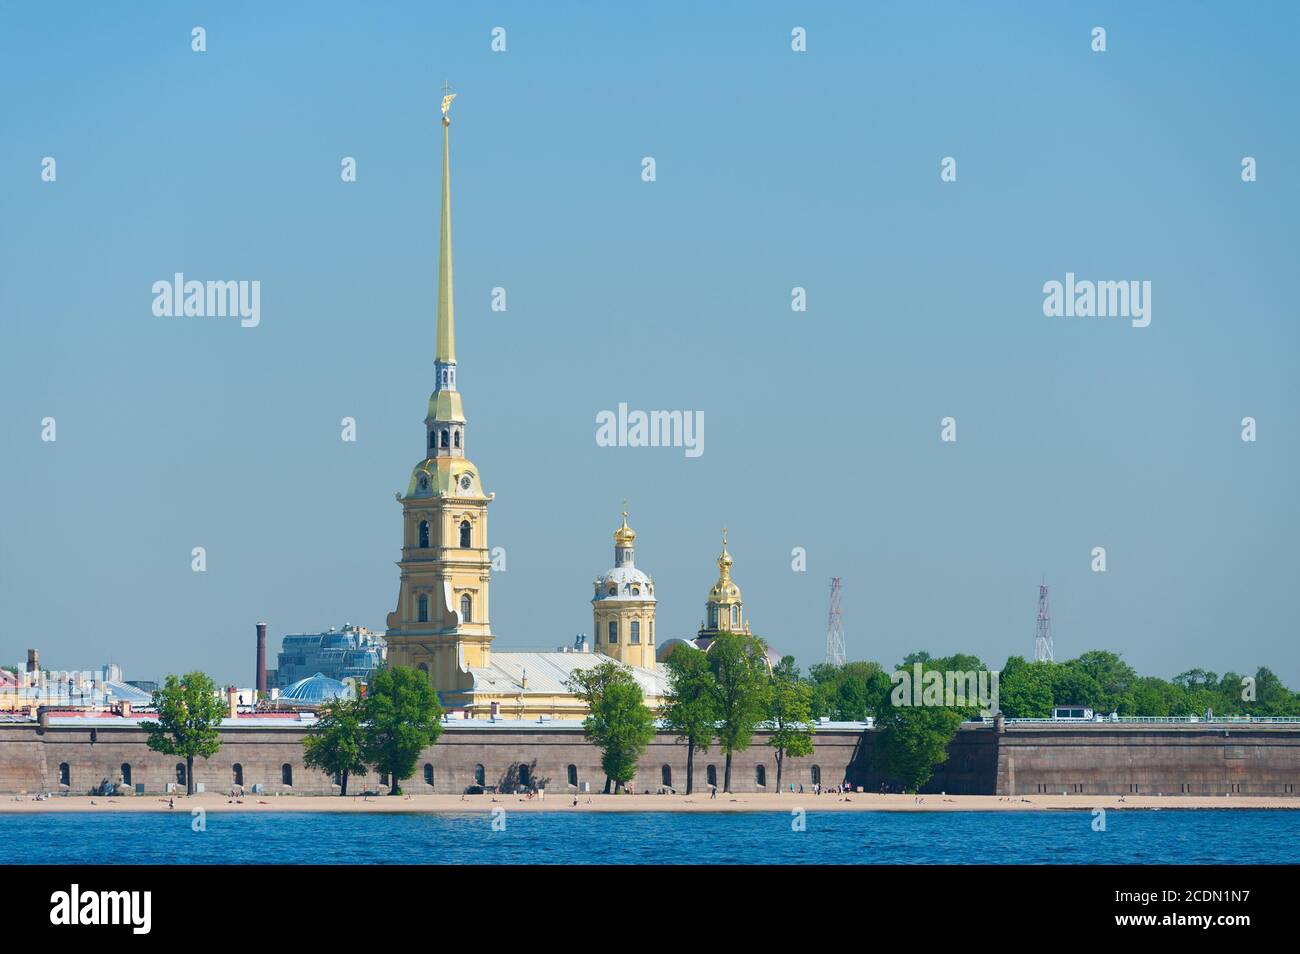 Peter and Paul fortress, St. Petersburg Stock Photo